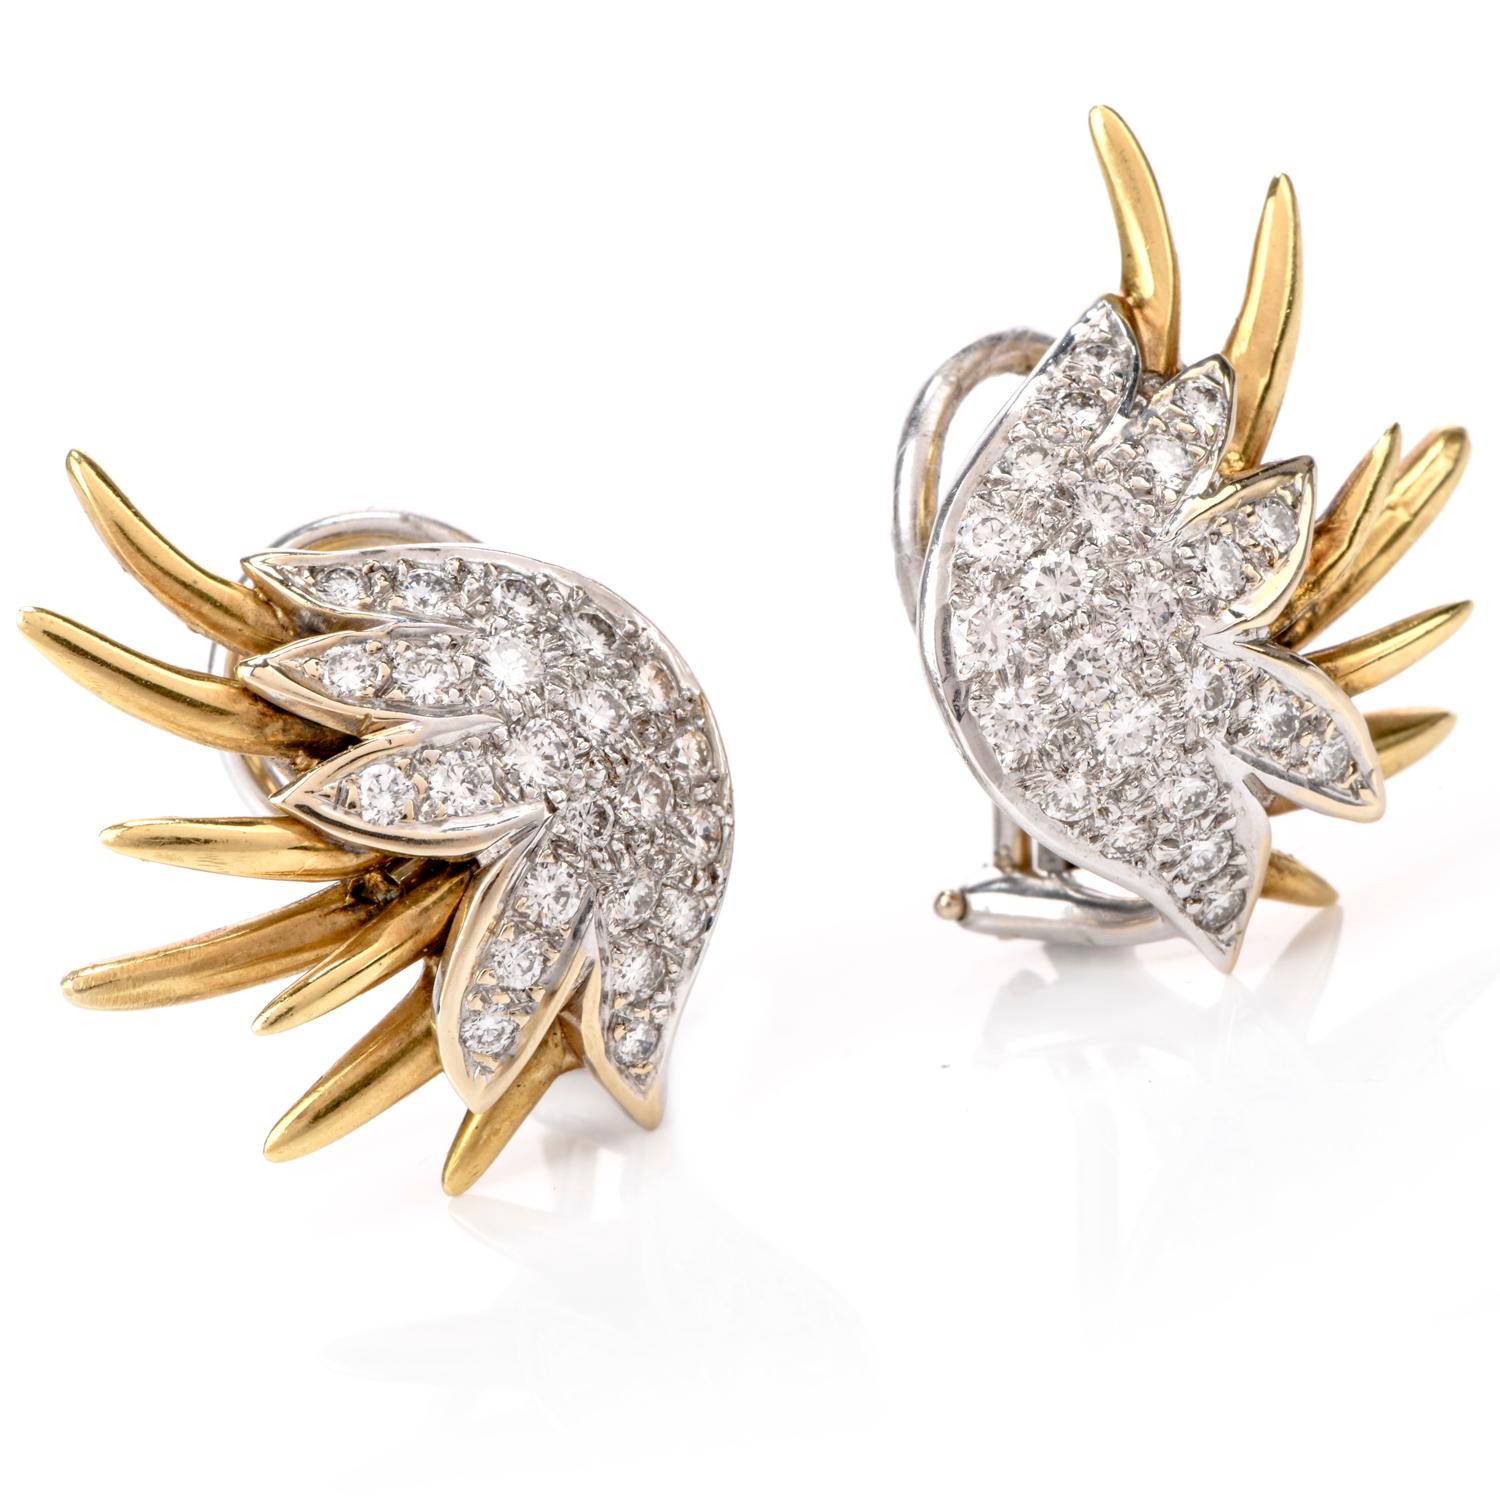 These  Stylish 18K Two Toned Gold Pave Diamond Earrings were inspired in a Fanning Wing motif from an important designer.

Bright white Pave set Diamonds mounting in white gold adorn the center of the earrings.  Weighing approx. 1.58 carat total,